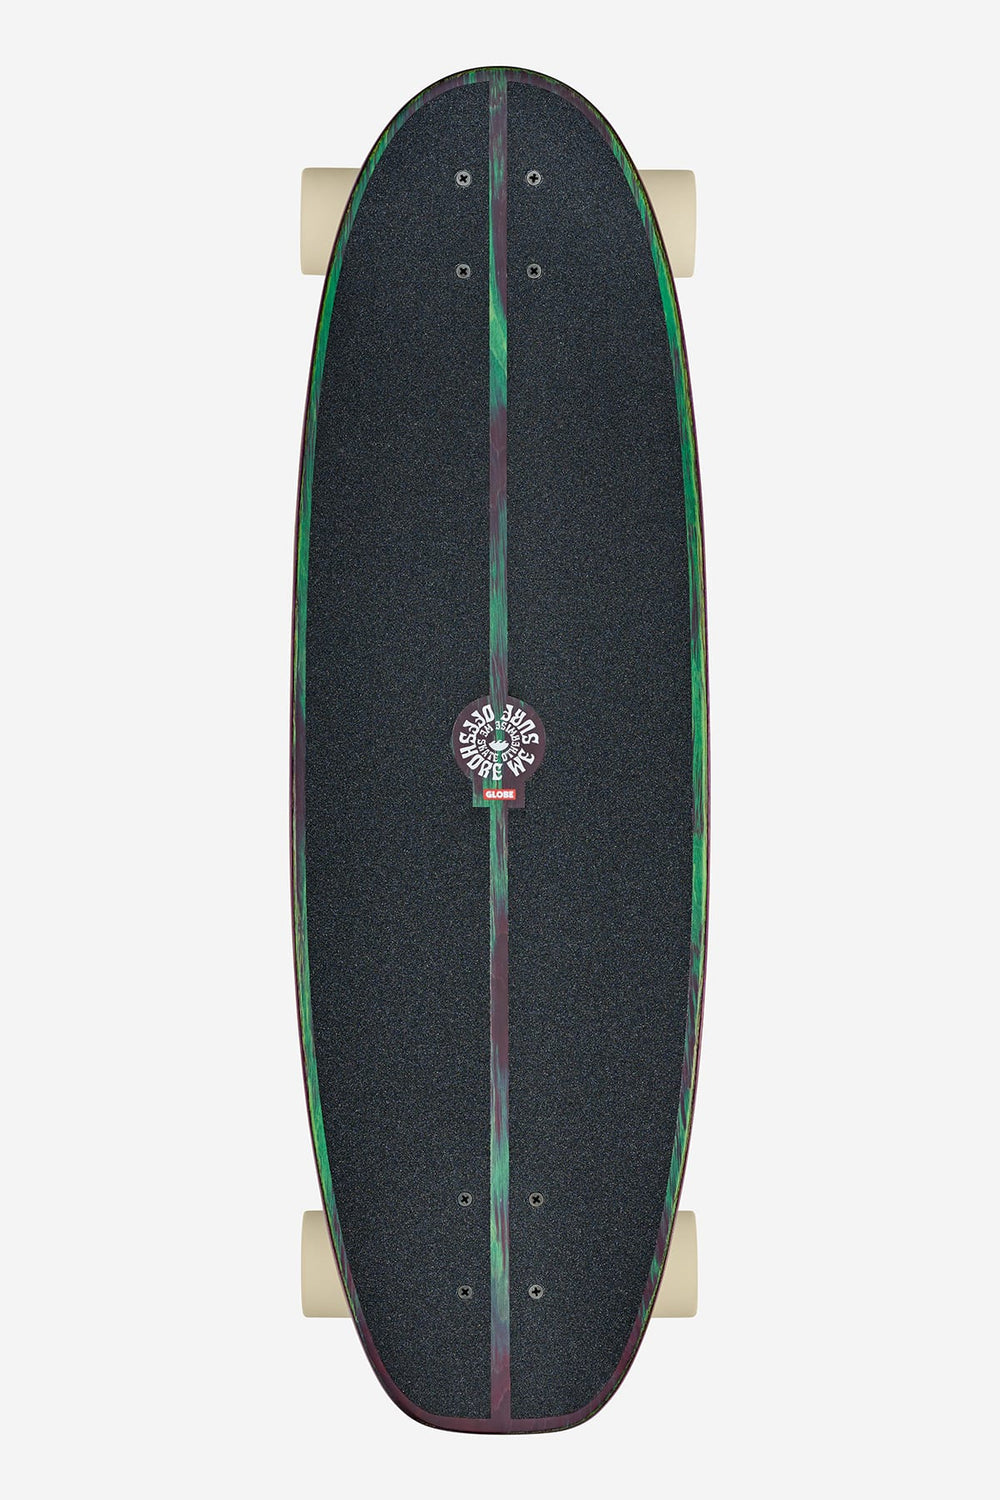 Costa - SS First Out - 31.5" Surf Skate